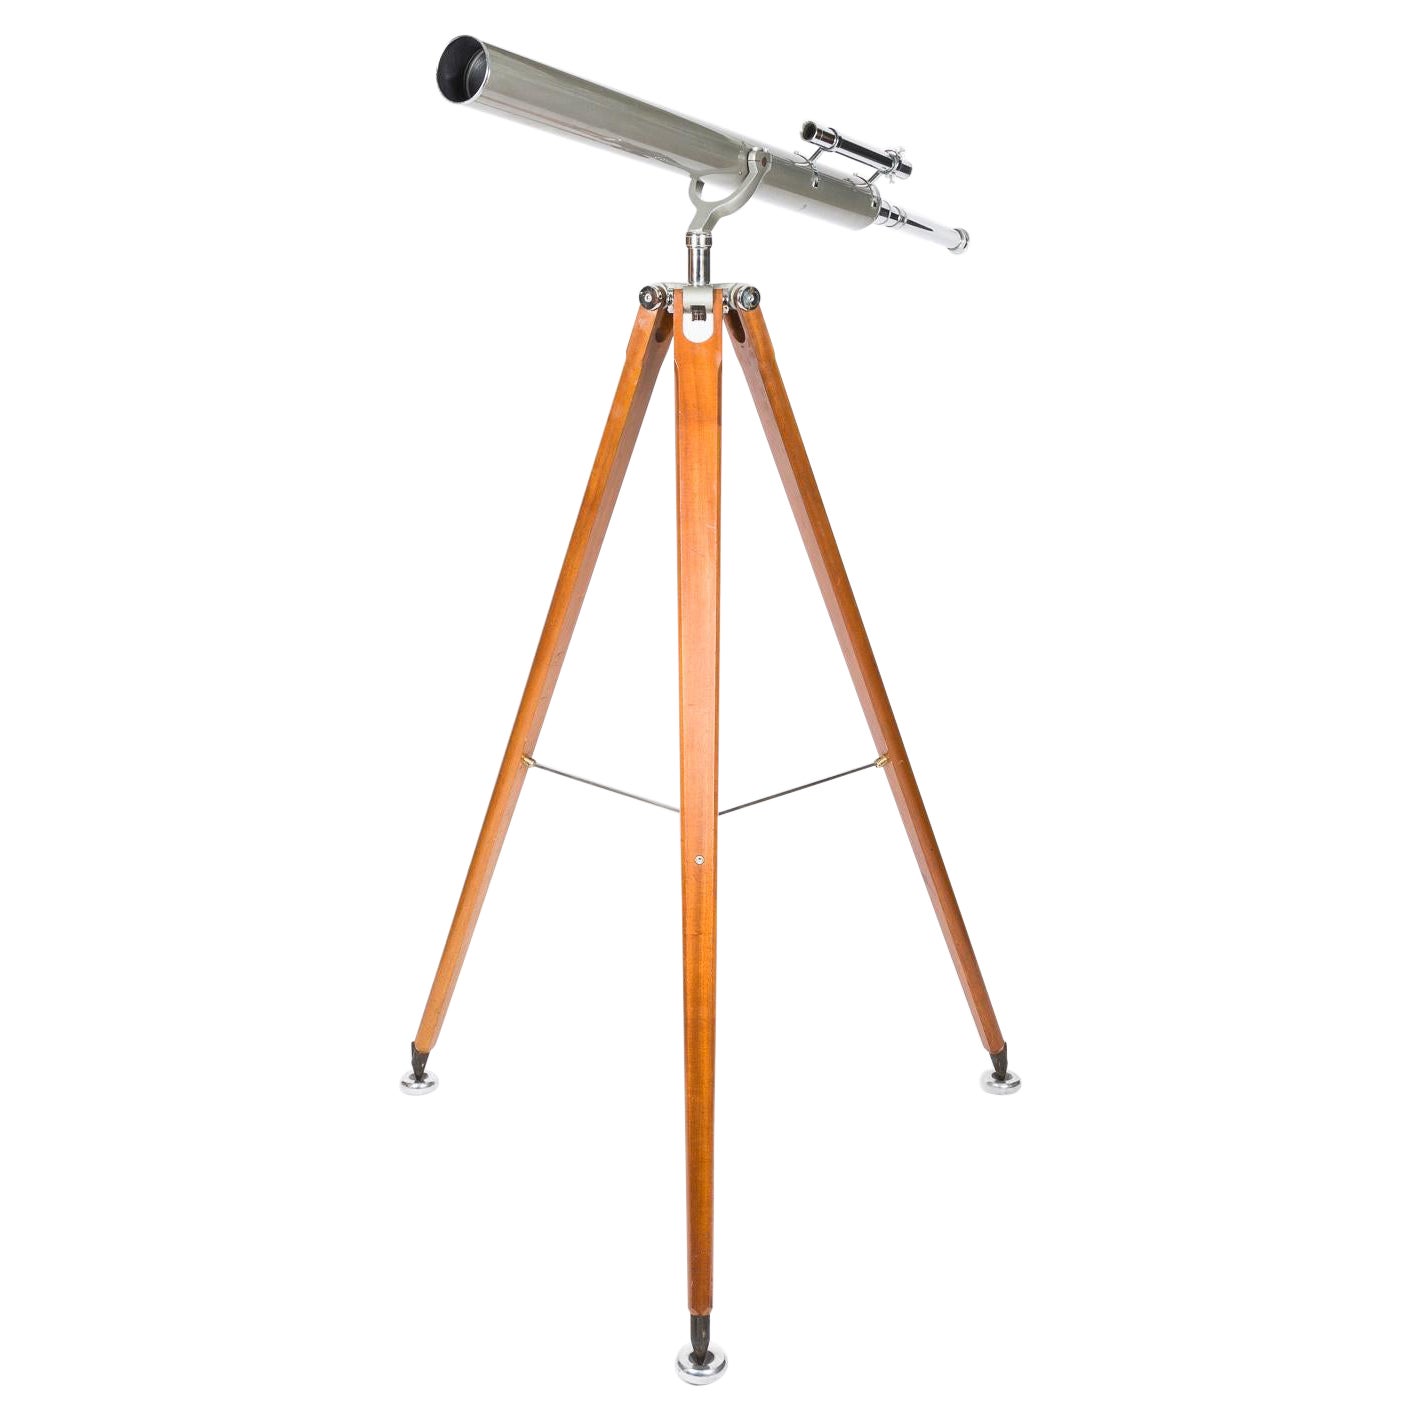 Astro tripod mounted telescope by Dollond of London